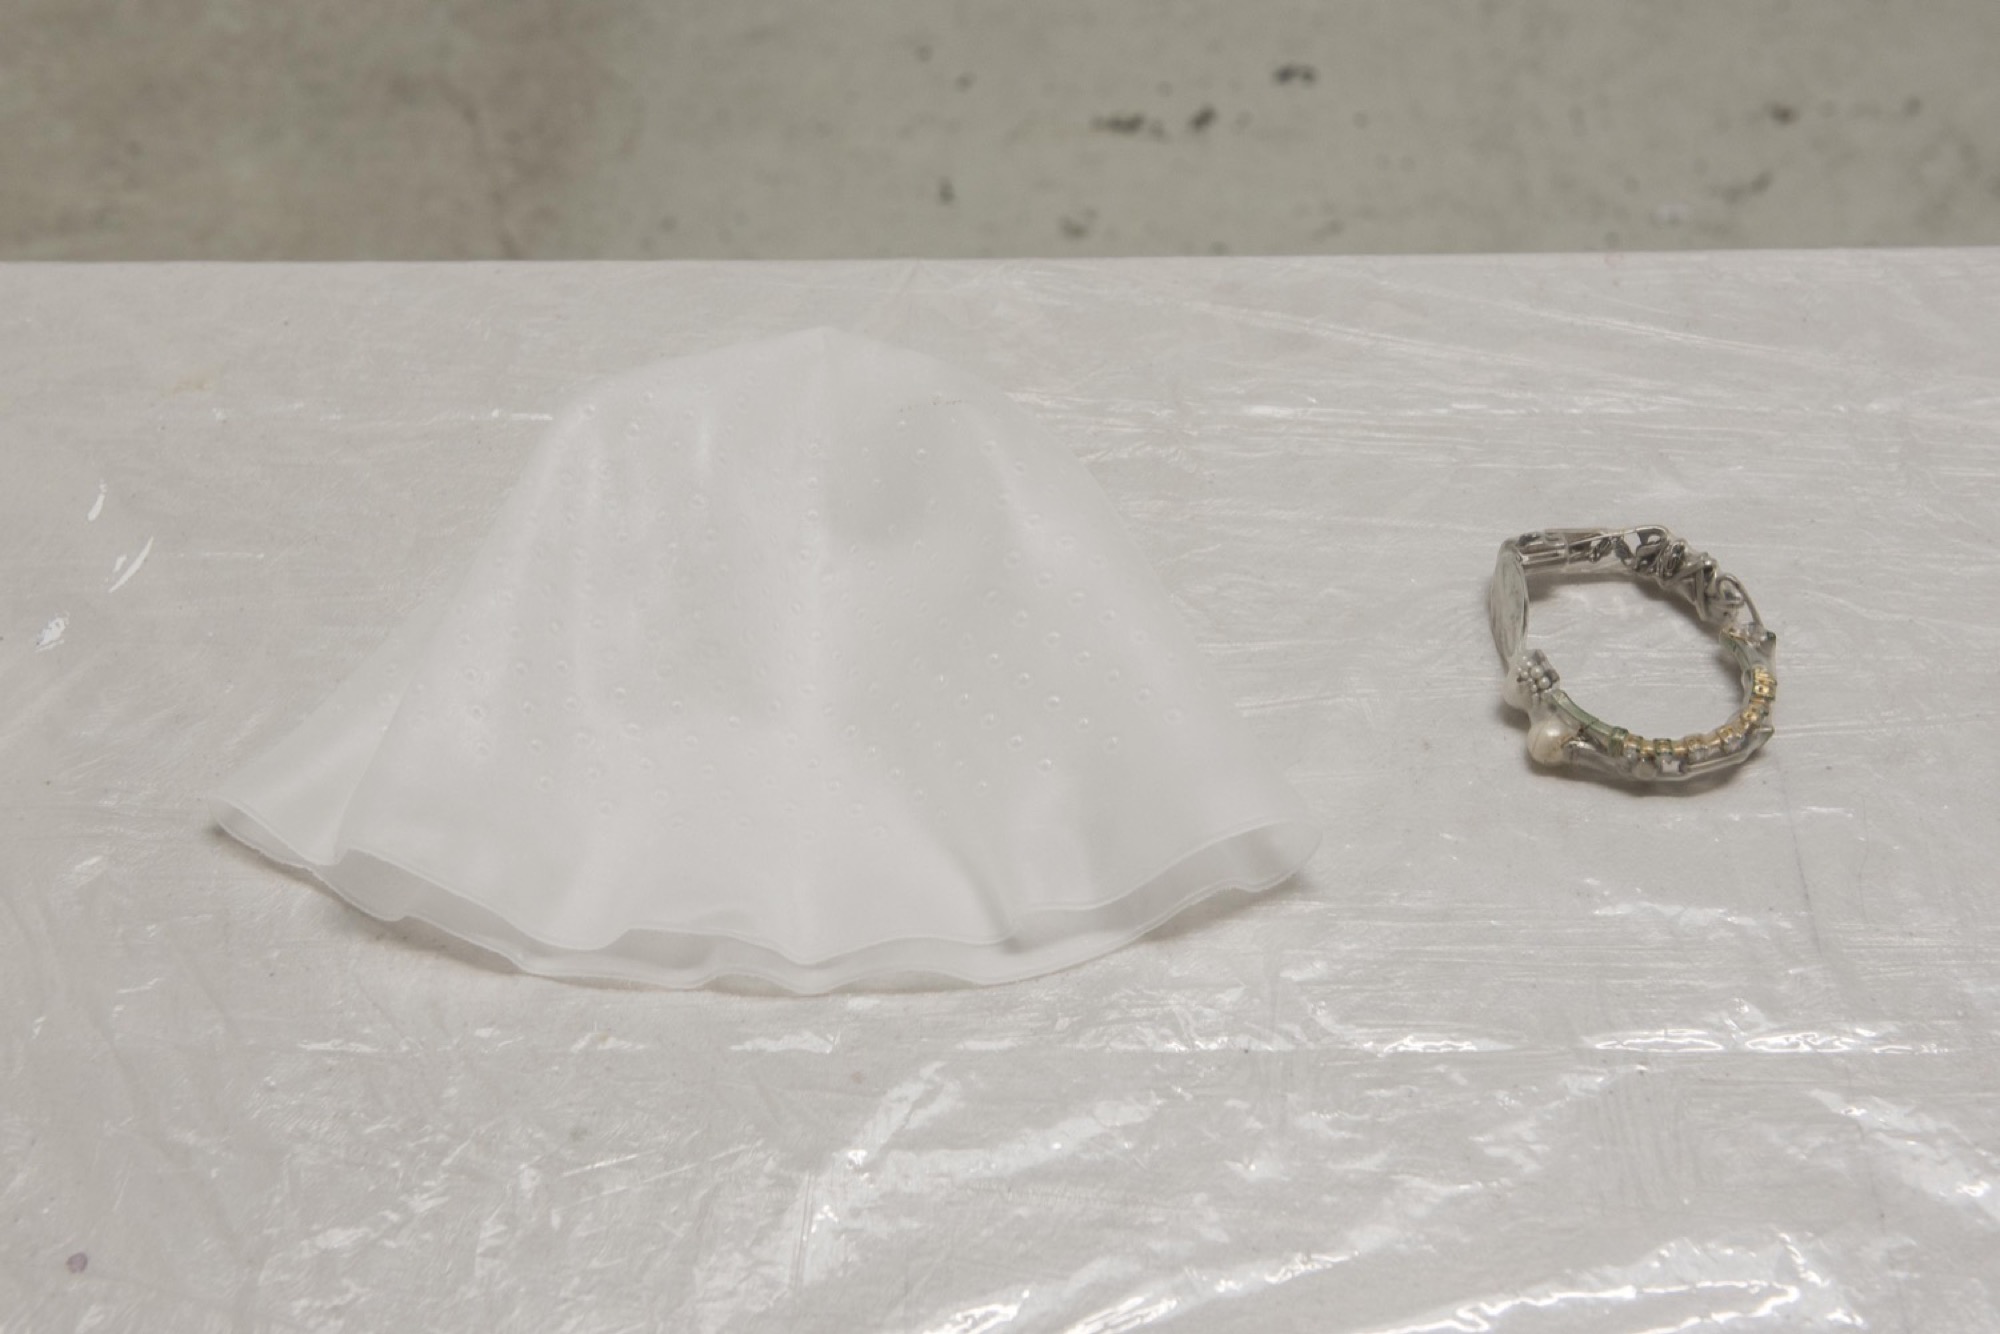 Rex Veal, <em>Bucket Hat</em> (left) <em>Bracelet</em> (right), 2020, rubber, plastic, cultured pearls, synthetic pearls, various metal components, found jewellery parts. Dimensions variable. Bossy’s Gallery. Courtesy of Bossy’s gallery. Photo: Jordan Halsall